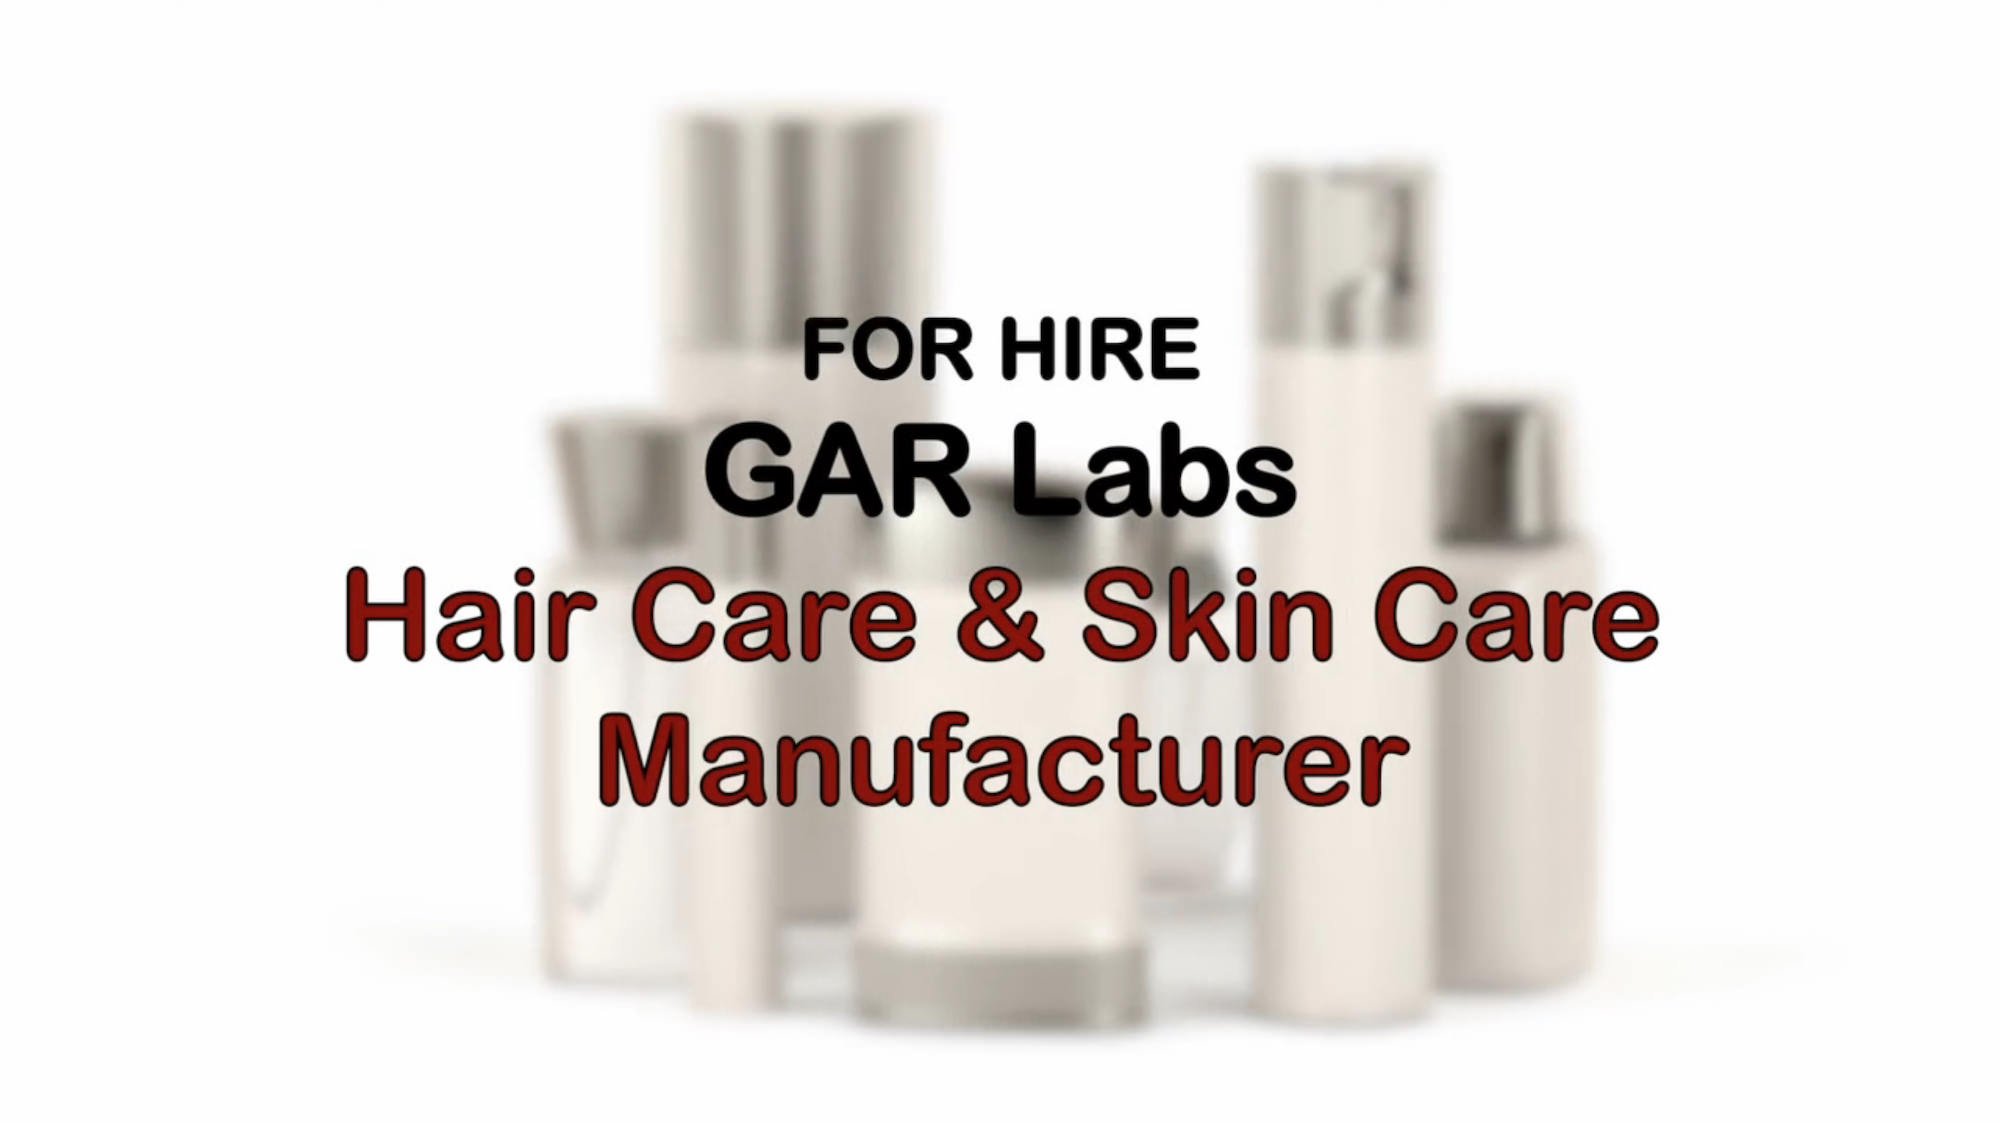 For Hire, Hair Care & Skin Care Manufacturer - GAR Labs